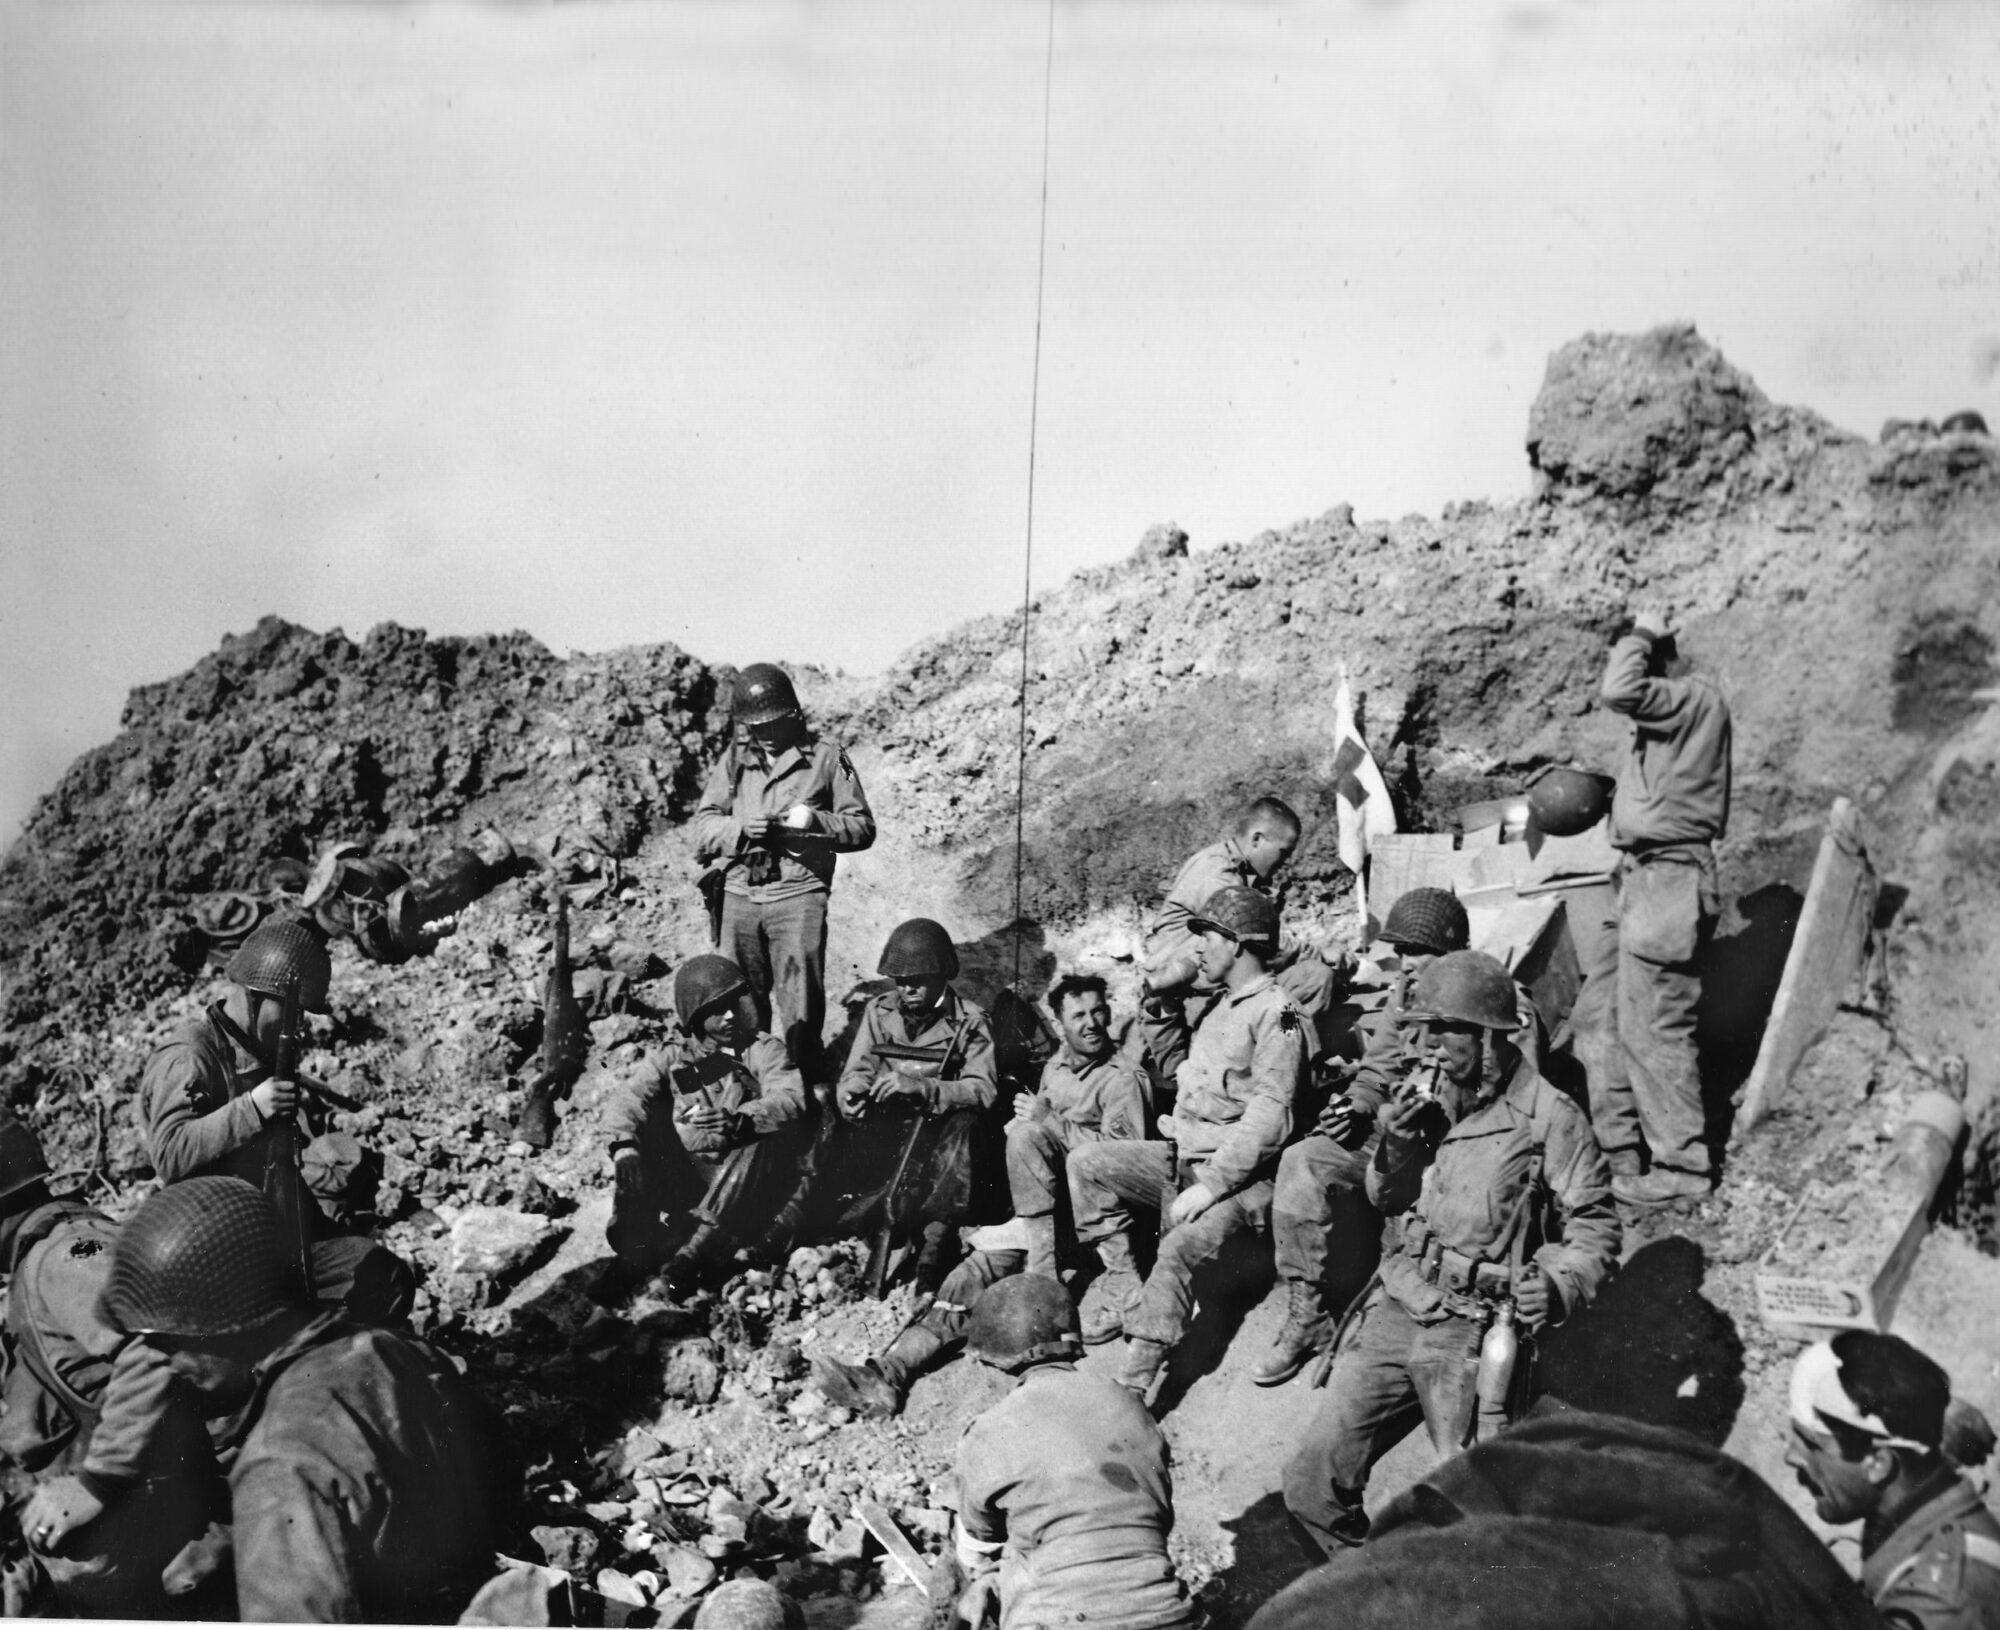 Tired and ragged, U.S. Army Rangers of the 2nd Battalion pause for a rest in a bomb crater. The Rangers captured the position at Pointe du Hoc, tracked down and destroyed the guns that had been removed by the Germans, and held their defensive perimeter until relieved by troops from the invasion beaches.